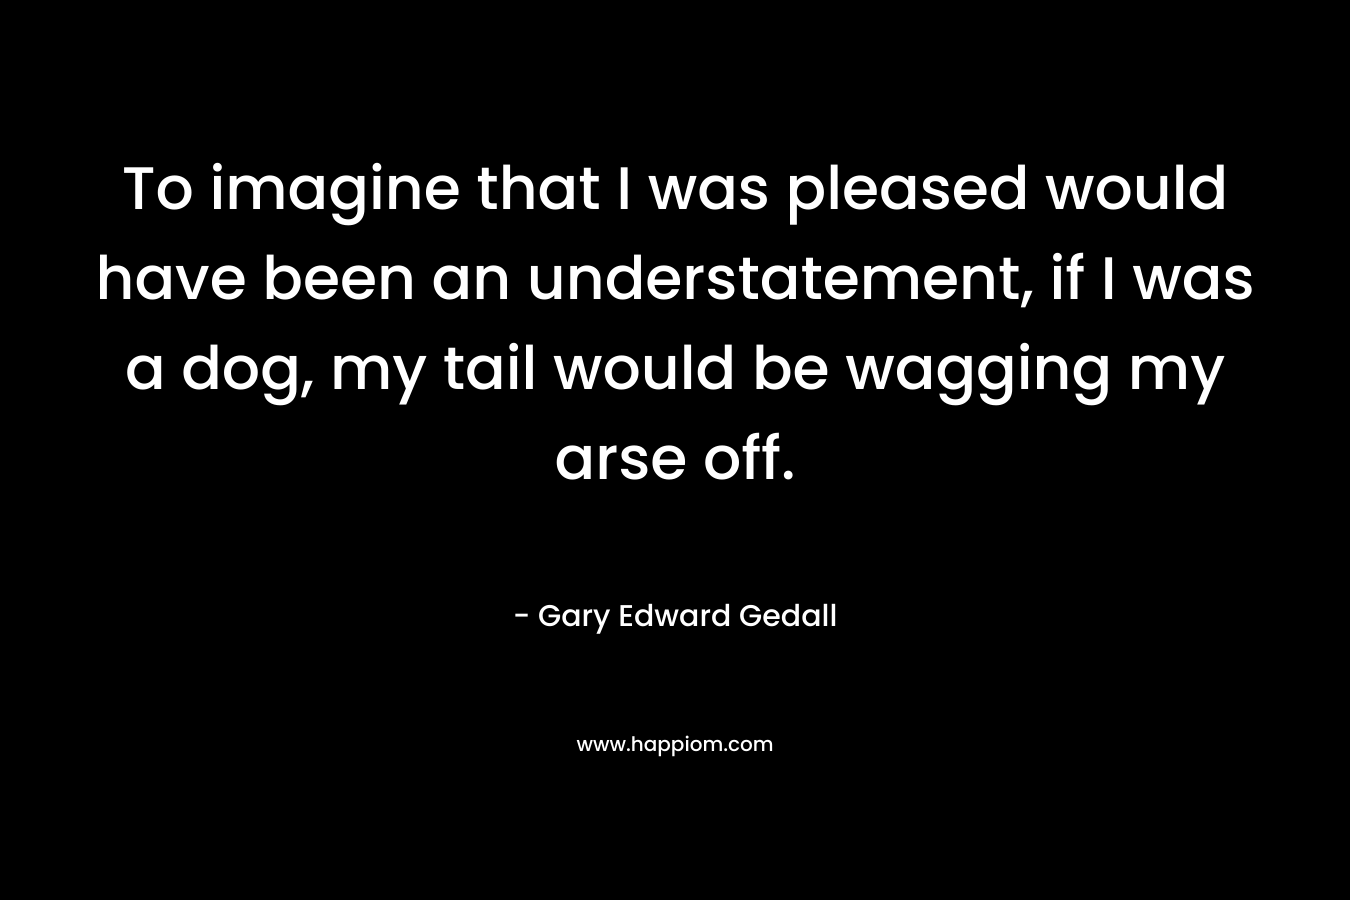 To imagine that I was pleased would have been an understatement, if I was a dog, my tail would be wagging my arse off. – Gary Edward Gedall